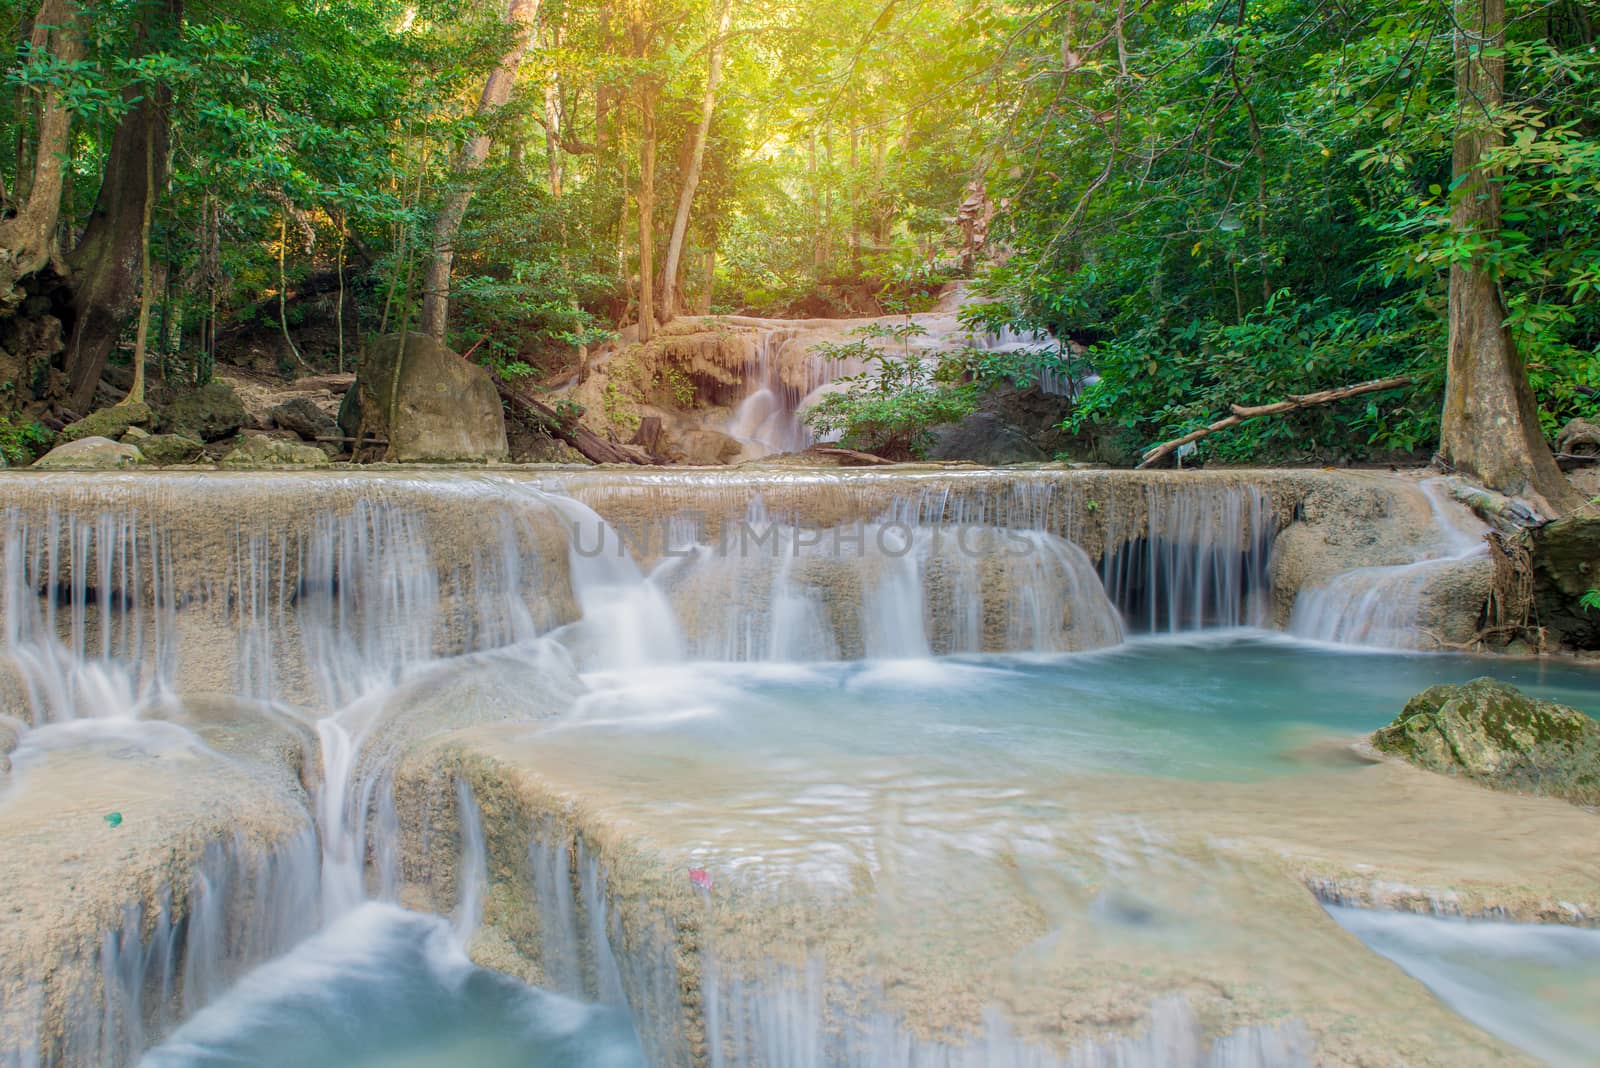 Waterfall in Deep forest at Erawan waterfall National Park, Thailand.